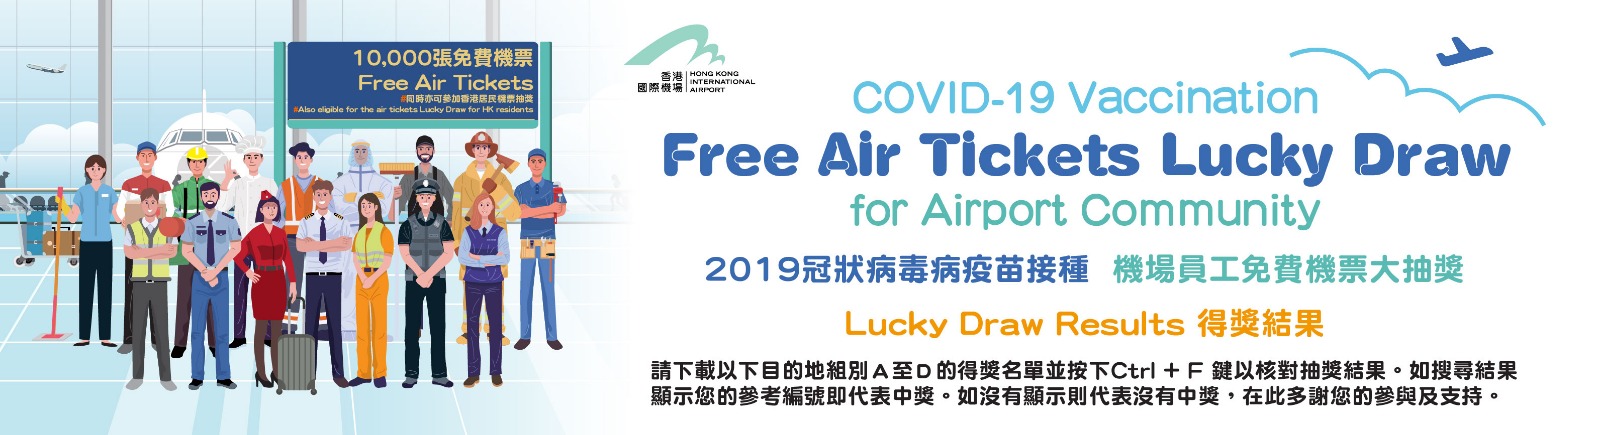 COVID-19 Vaccination Free Air Ticket Lucky Draw to Airport Community